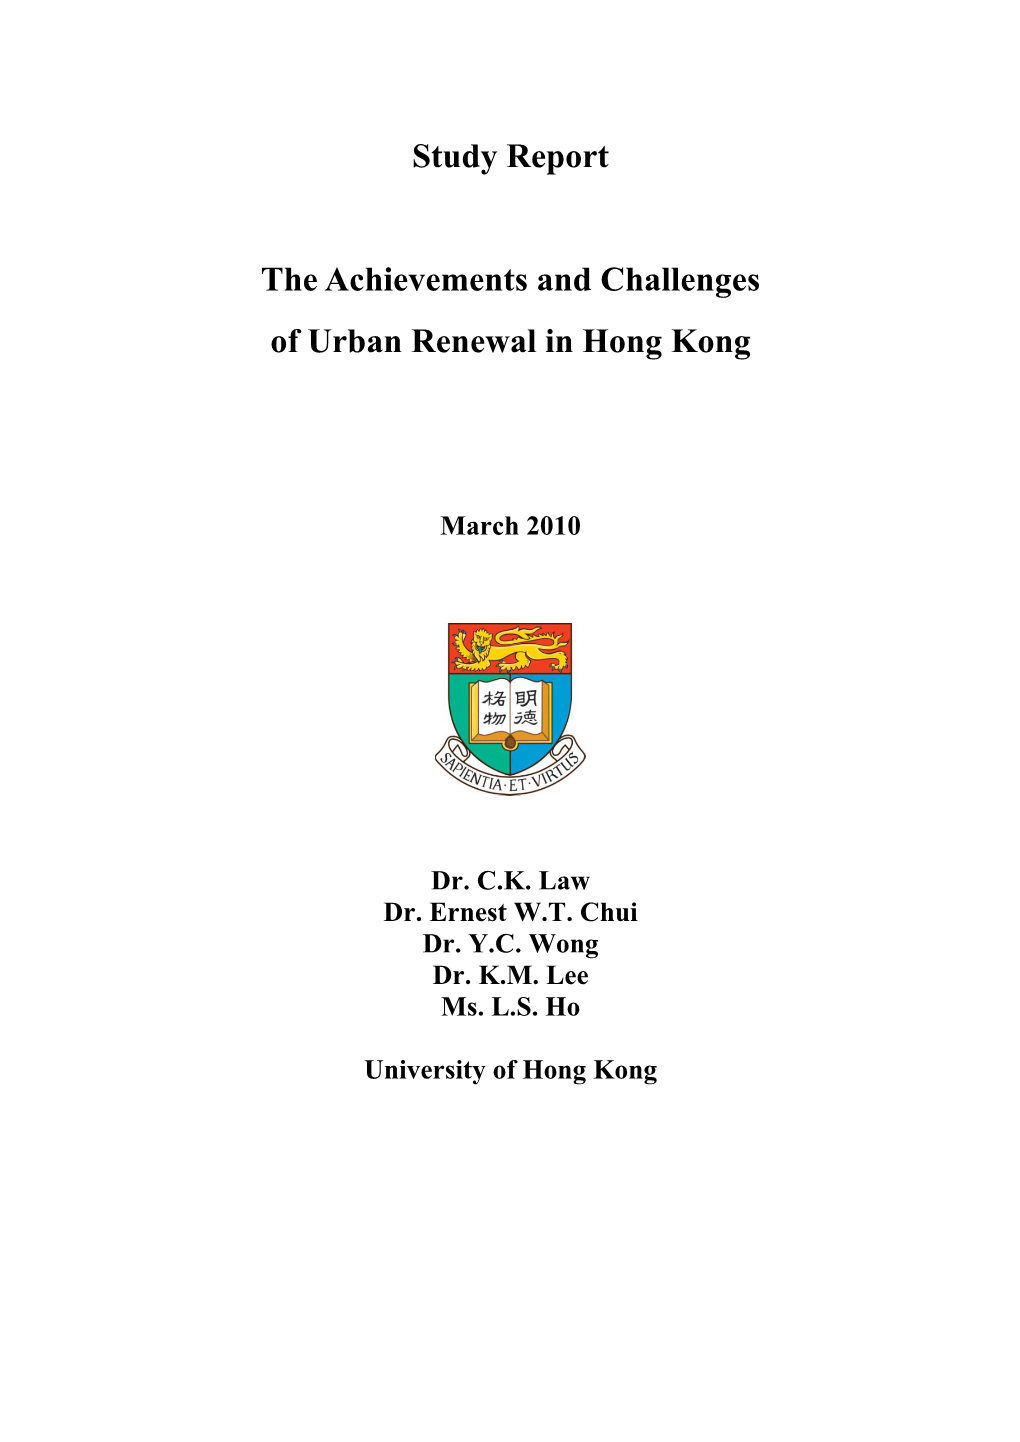 Final Report of the Study of the Achievements and Challenges Of